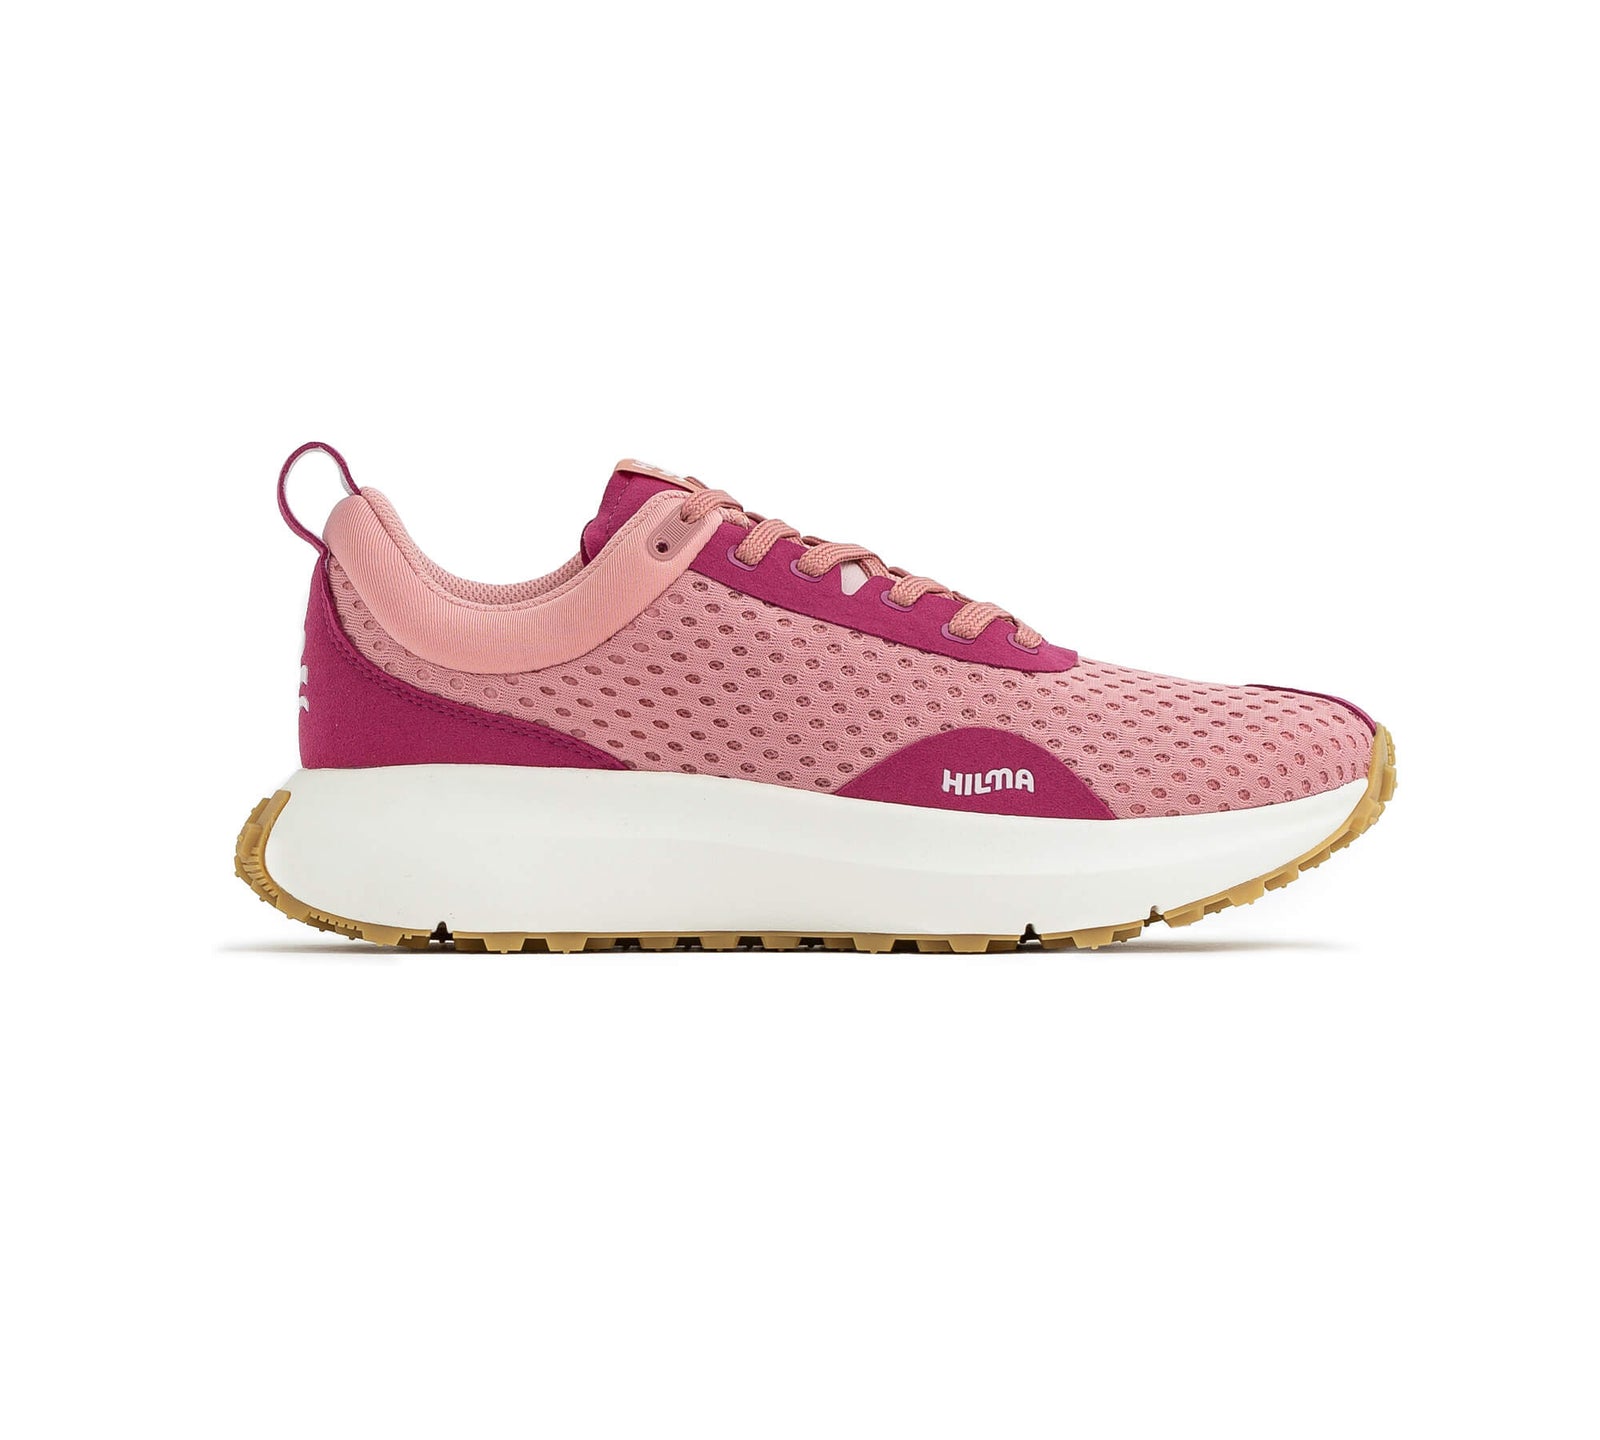 Exterior side view of right Everywhere Hilma Running Shoe in Rose Tan